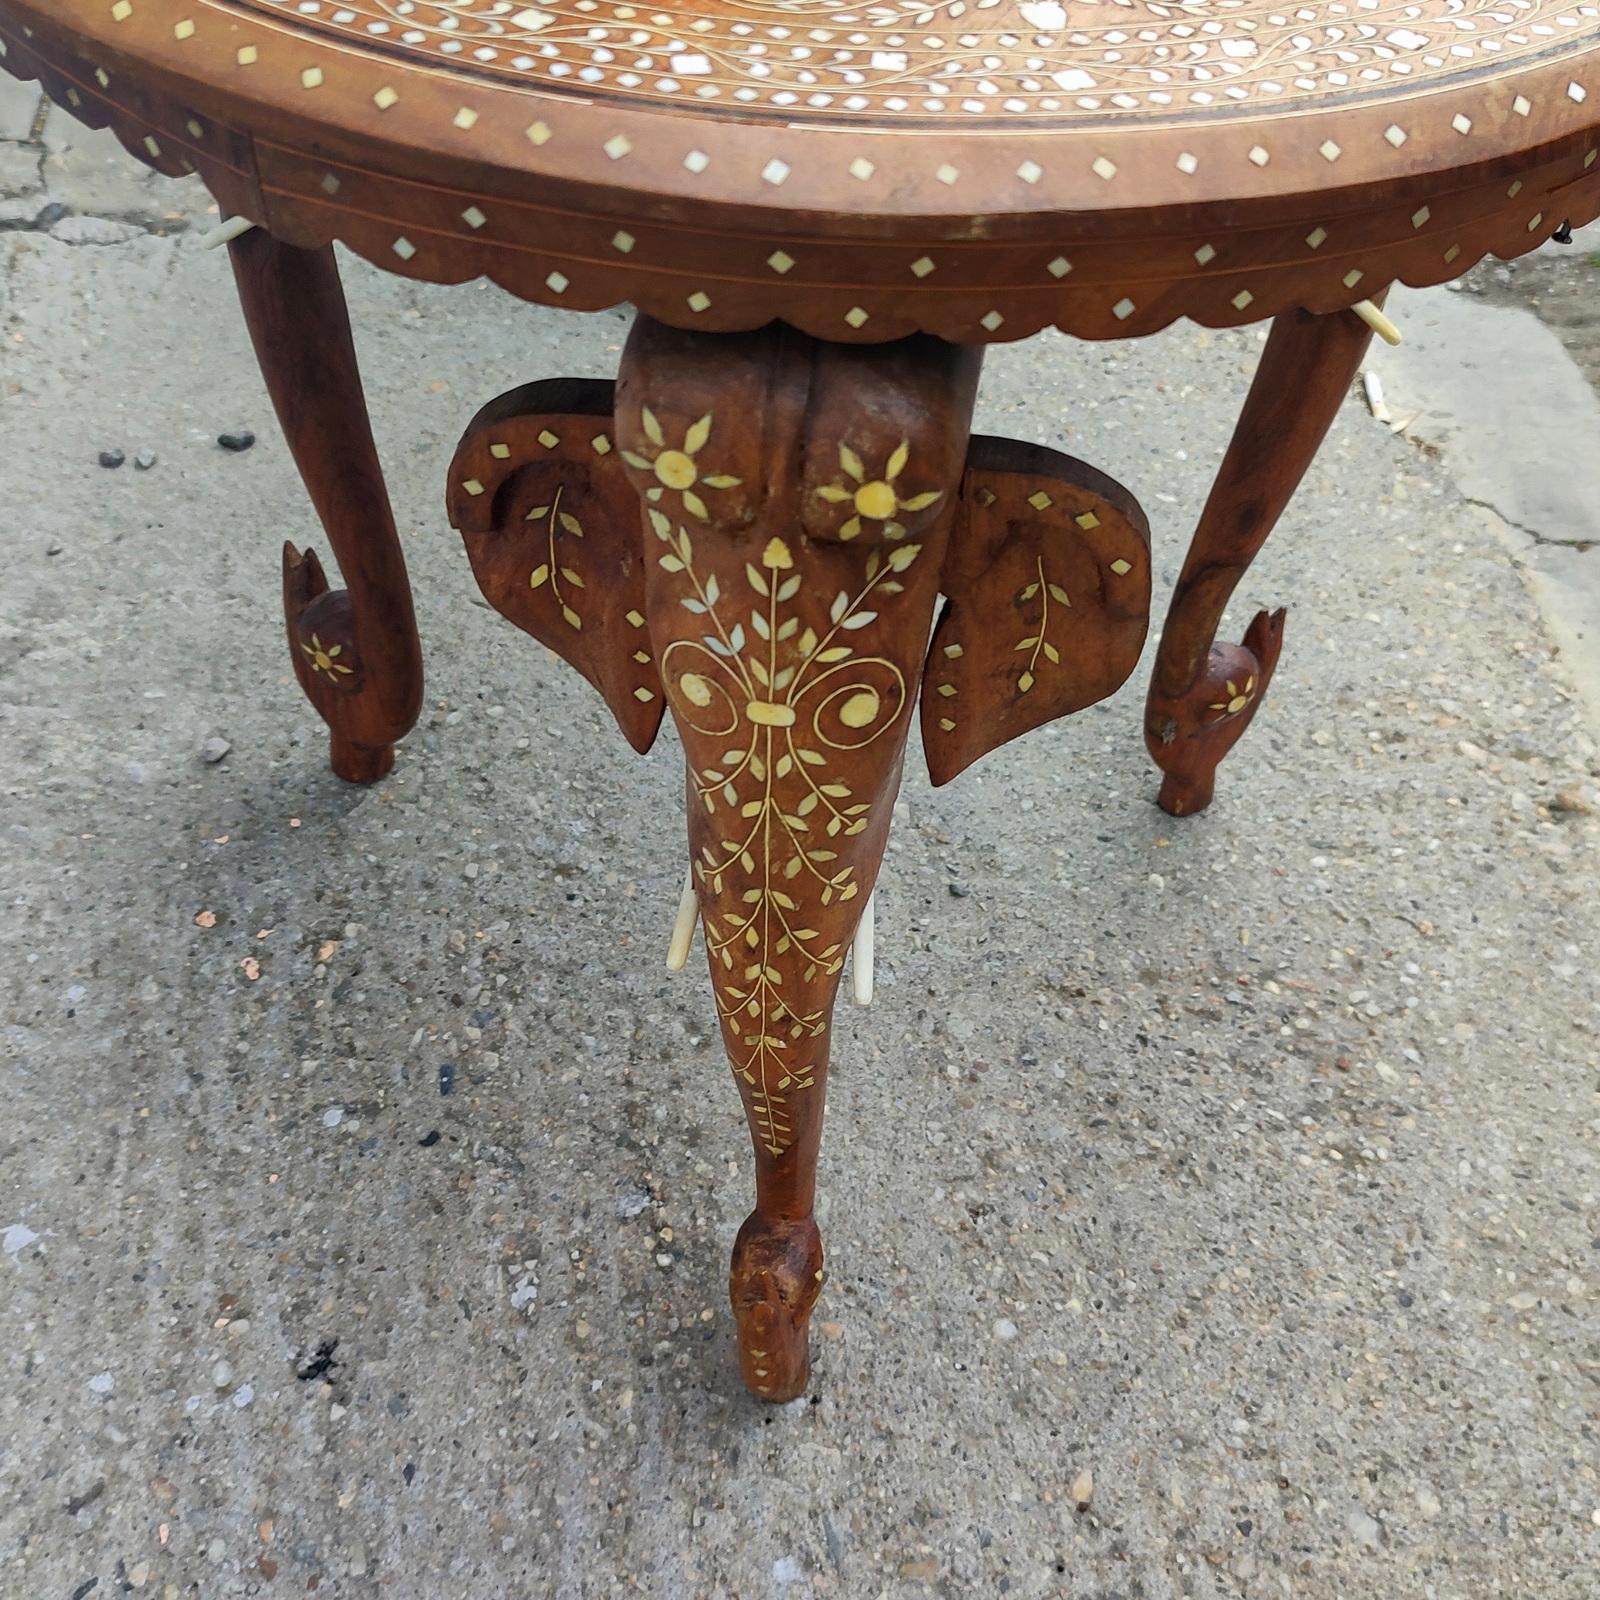 20th Century Anglo Indian Carved Wood and Inlaid Round Table with Elephants  For Sale